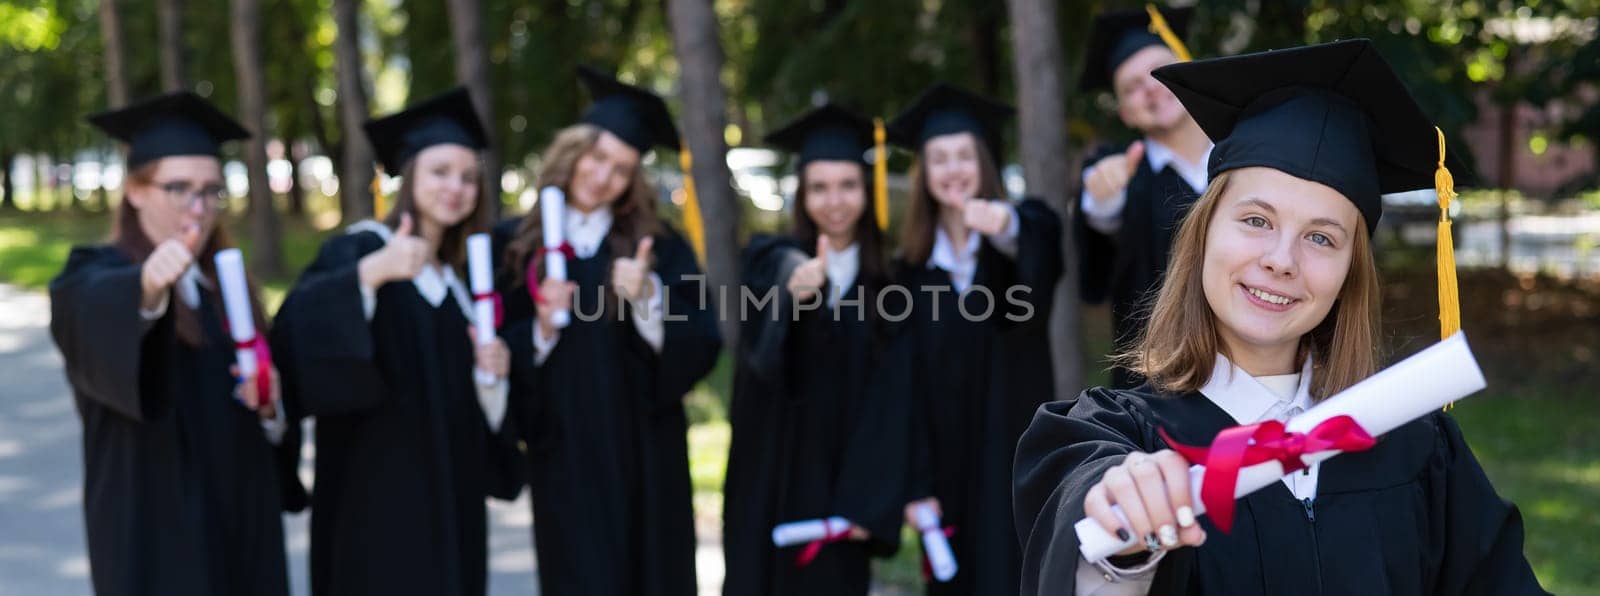 Happy young caucasian woman celebrating graduation with classmates. A group of graduate students outdoors. Widescreen. by mrwed54